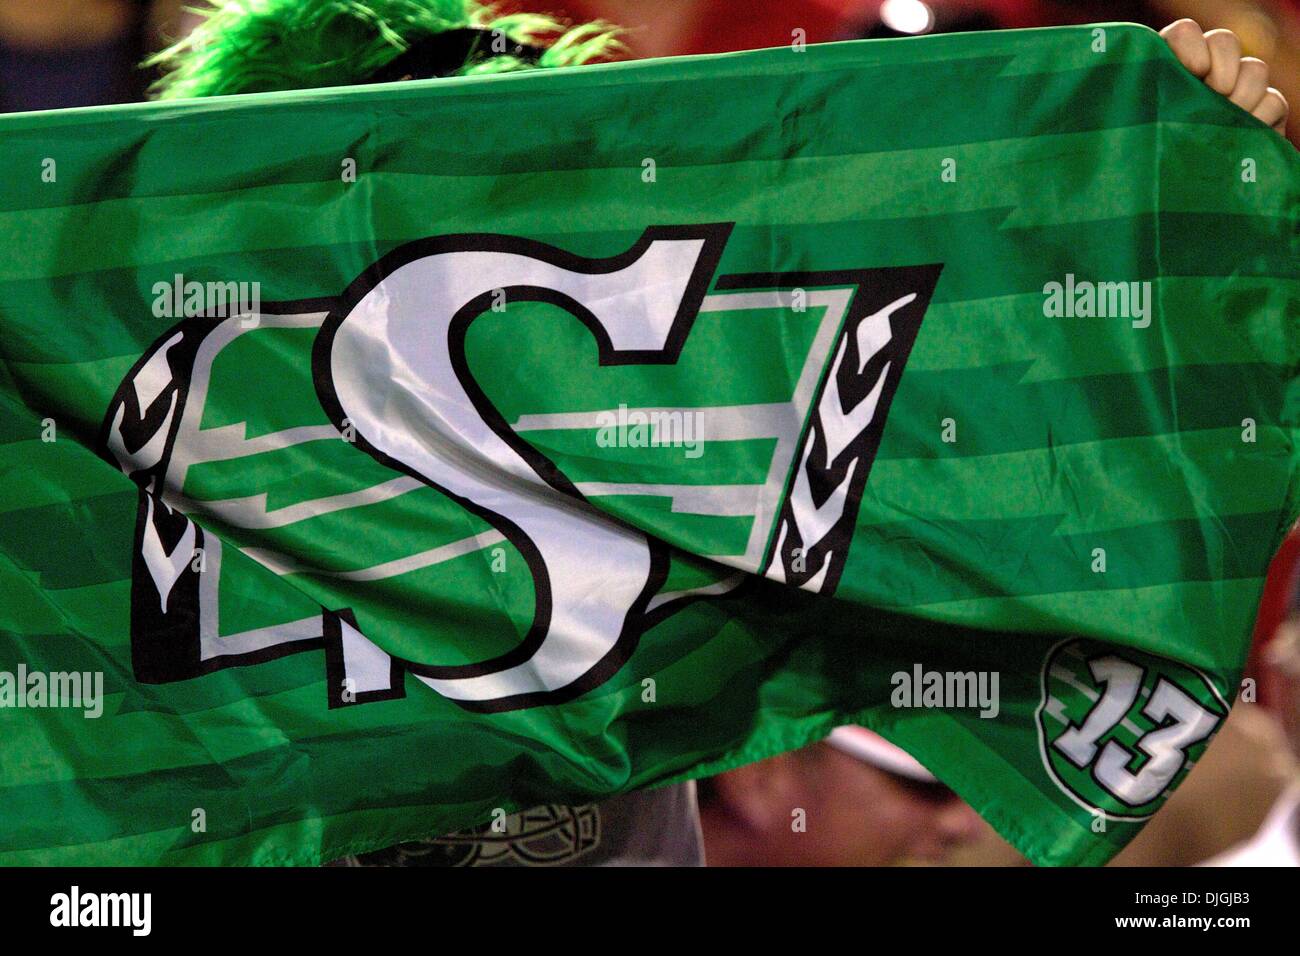 July 24, 2010 - Calgary, Alberta, Canada - 24 July 2010: A Saskatchewan Roughriders fan shows her support during a game against the Calgary Stampeders at McMahon Stadium in Calgary, Alberta.  The Calgary Stampeders defeated the Saskatchewan Roughriders 40 to 20..Mandatory Credit: Irena Thompson / Southcreek Global (Credit Image: Â© Southcreek Global/ZUMApress.com) Stock Photo